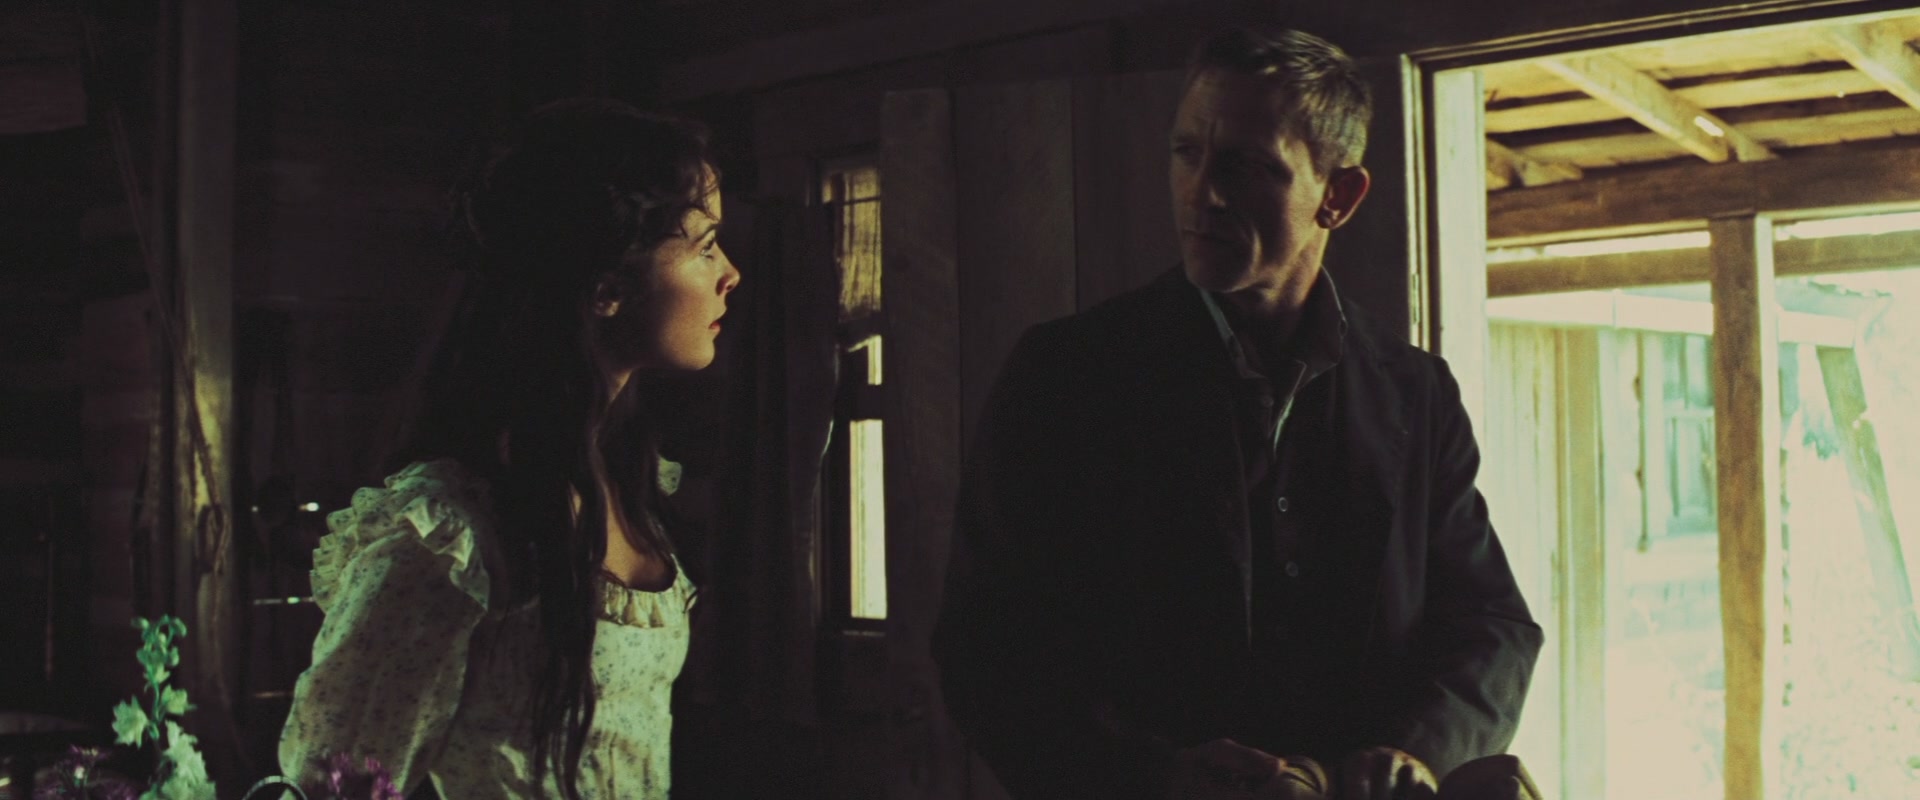 Abigail Spencer and Daniel Craig. Cowboys and Aliens.